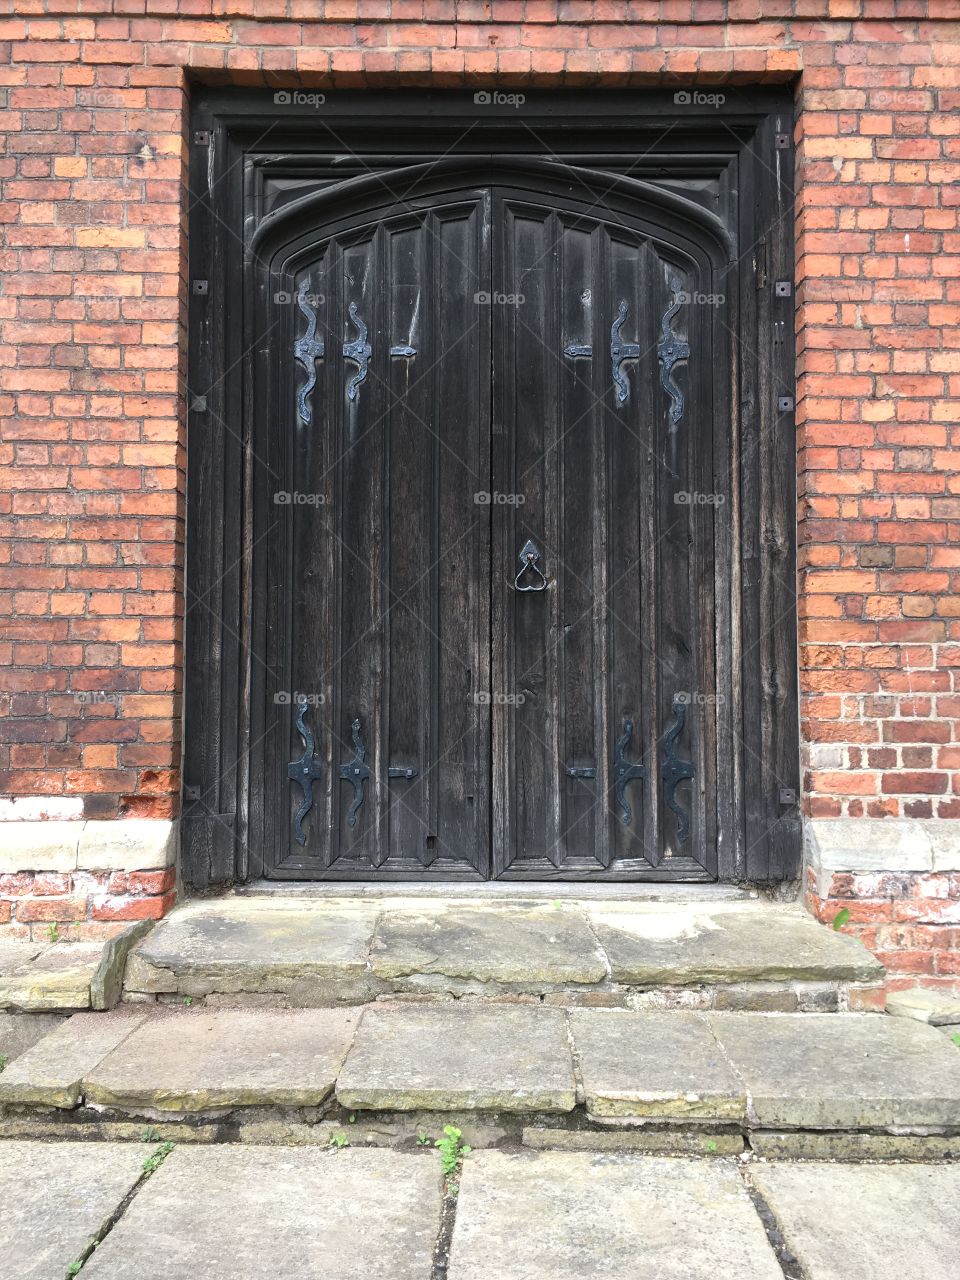 Really old vintage black doorway with steps at Gainsborough Old Hall in England 